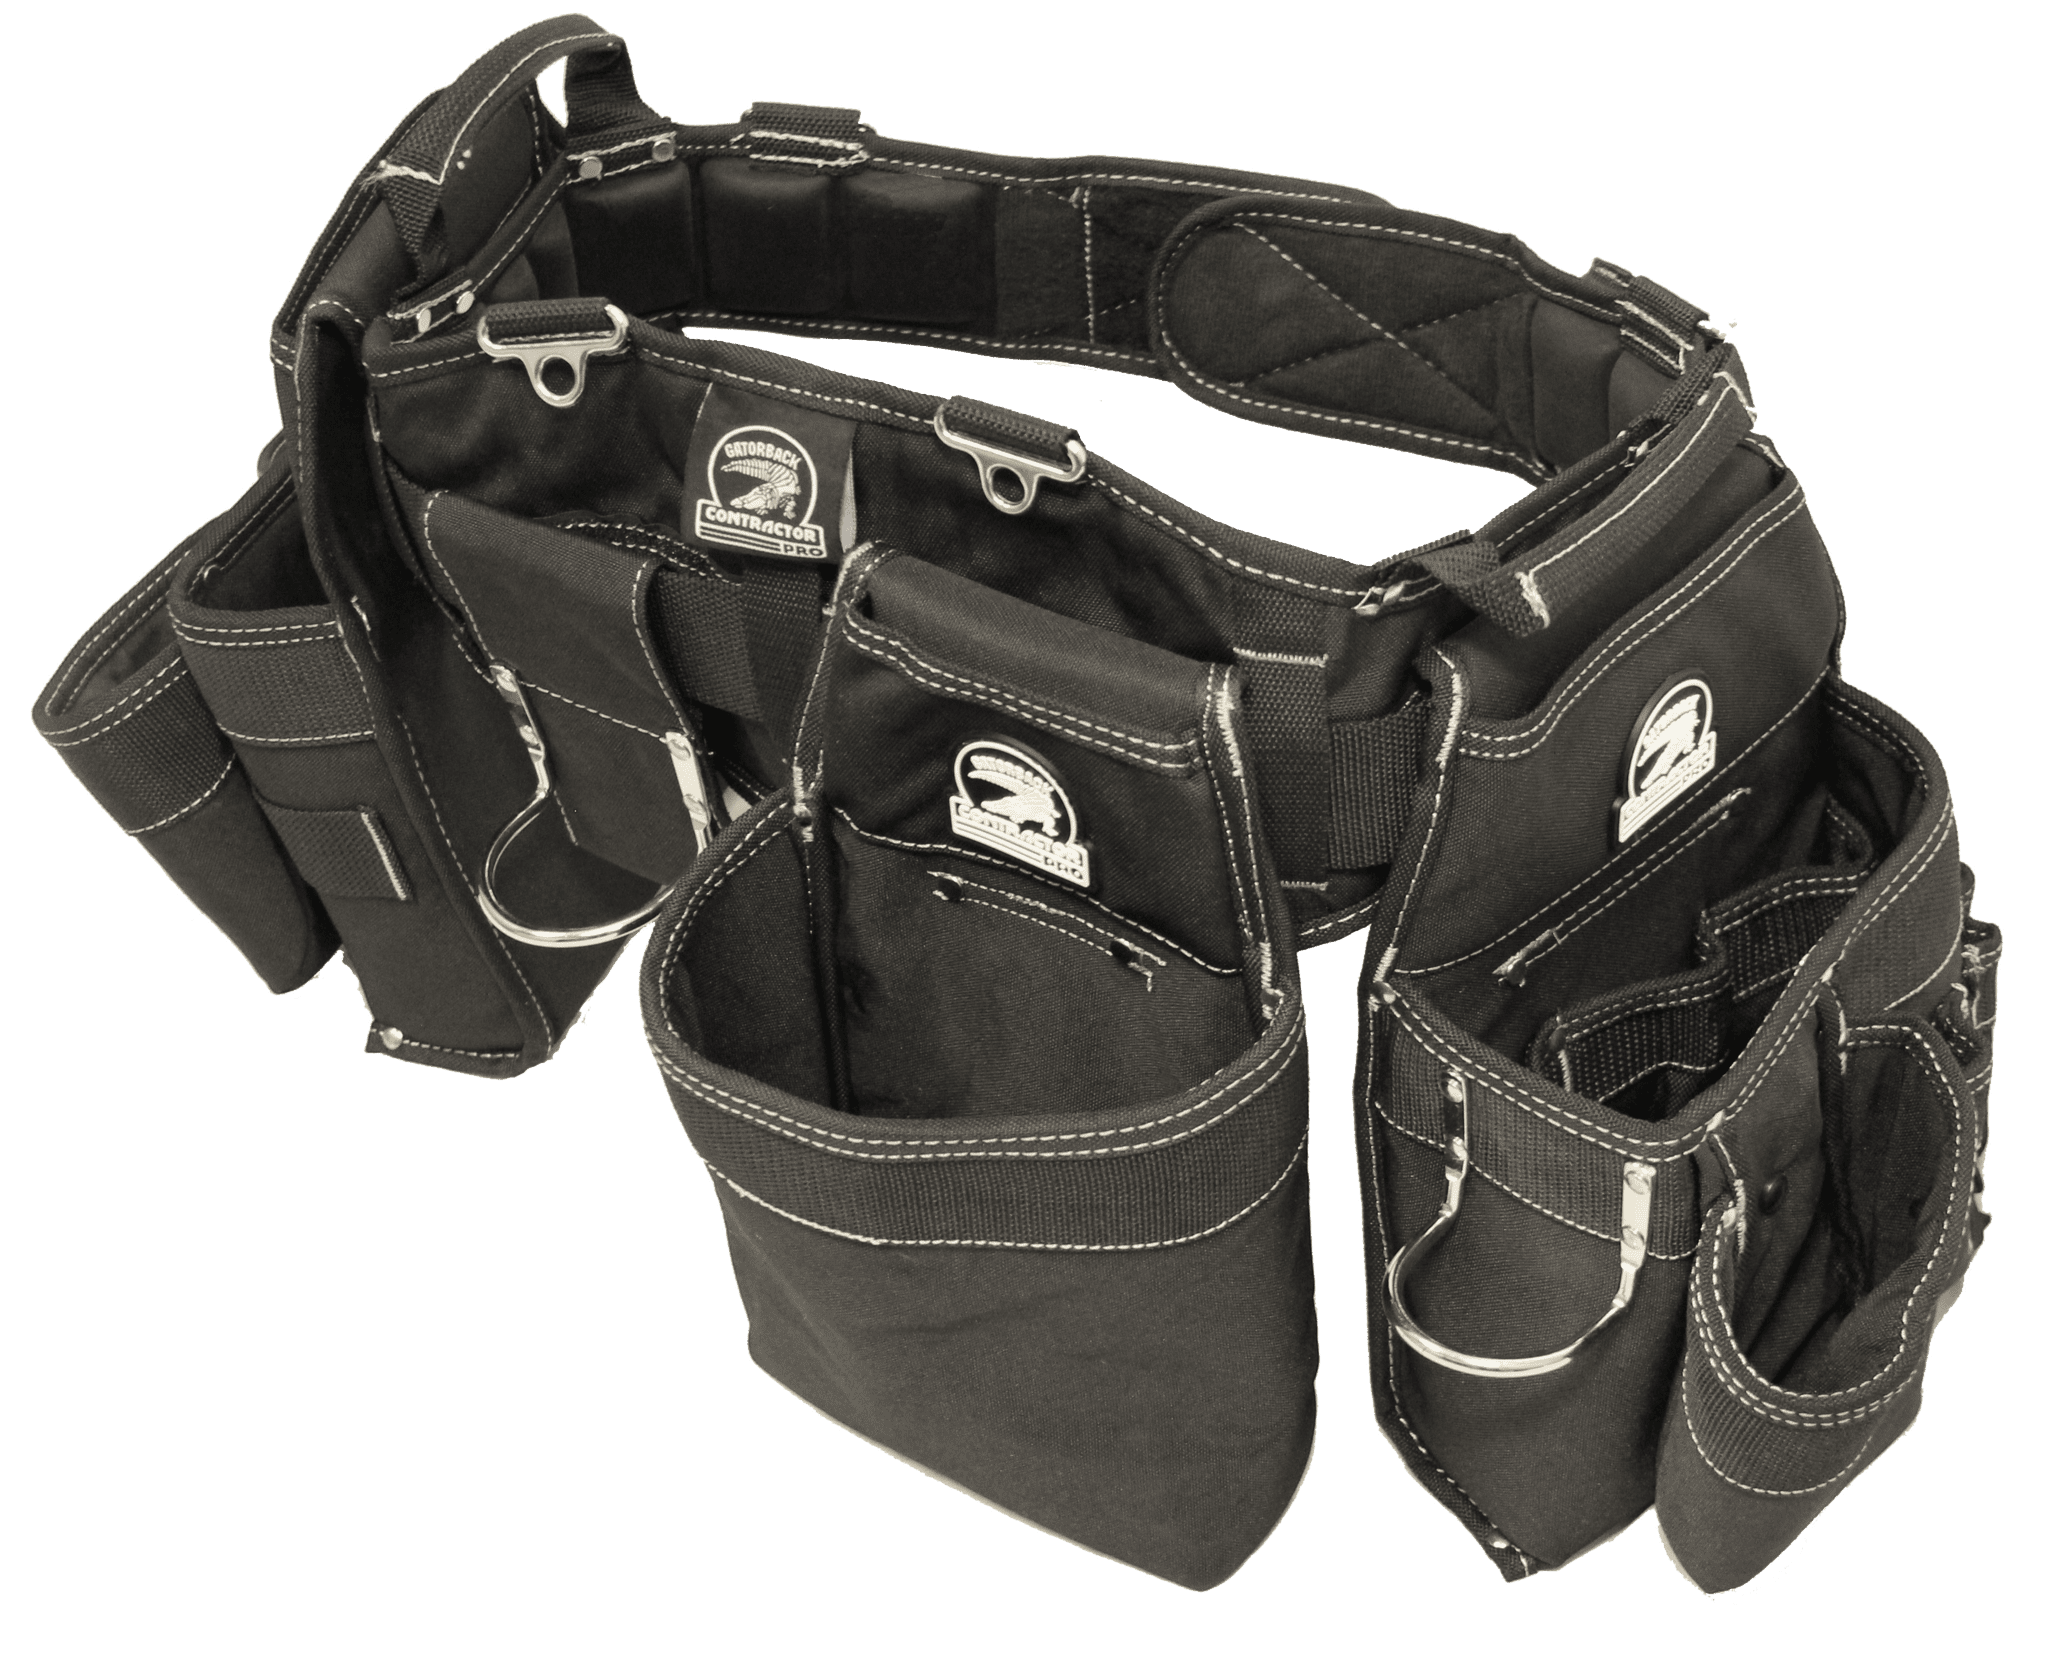 Carpenter Tools FINALLY No More Need For A Tool Belt With Suspenders Tool Belt Pad Makes Wearing Any Tool Belt Pain Free TBP-1 Tool Belts For Men Are Now COMFORTABLE With The New Tool Belt Pad 